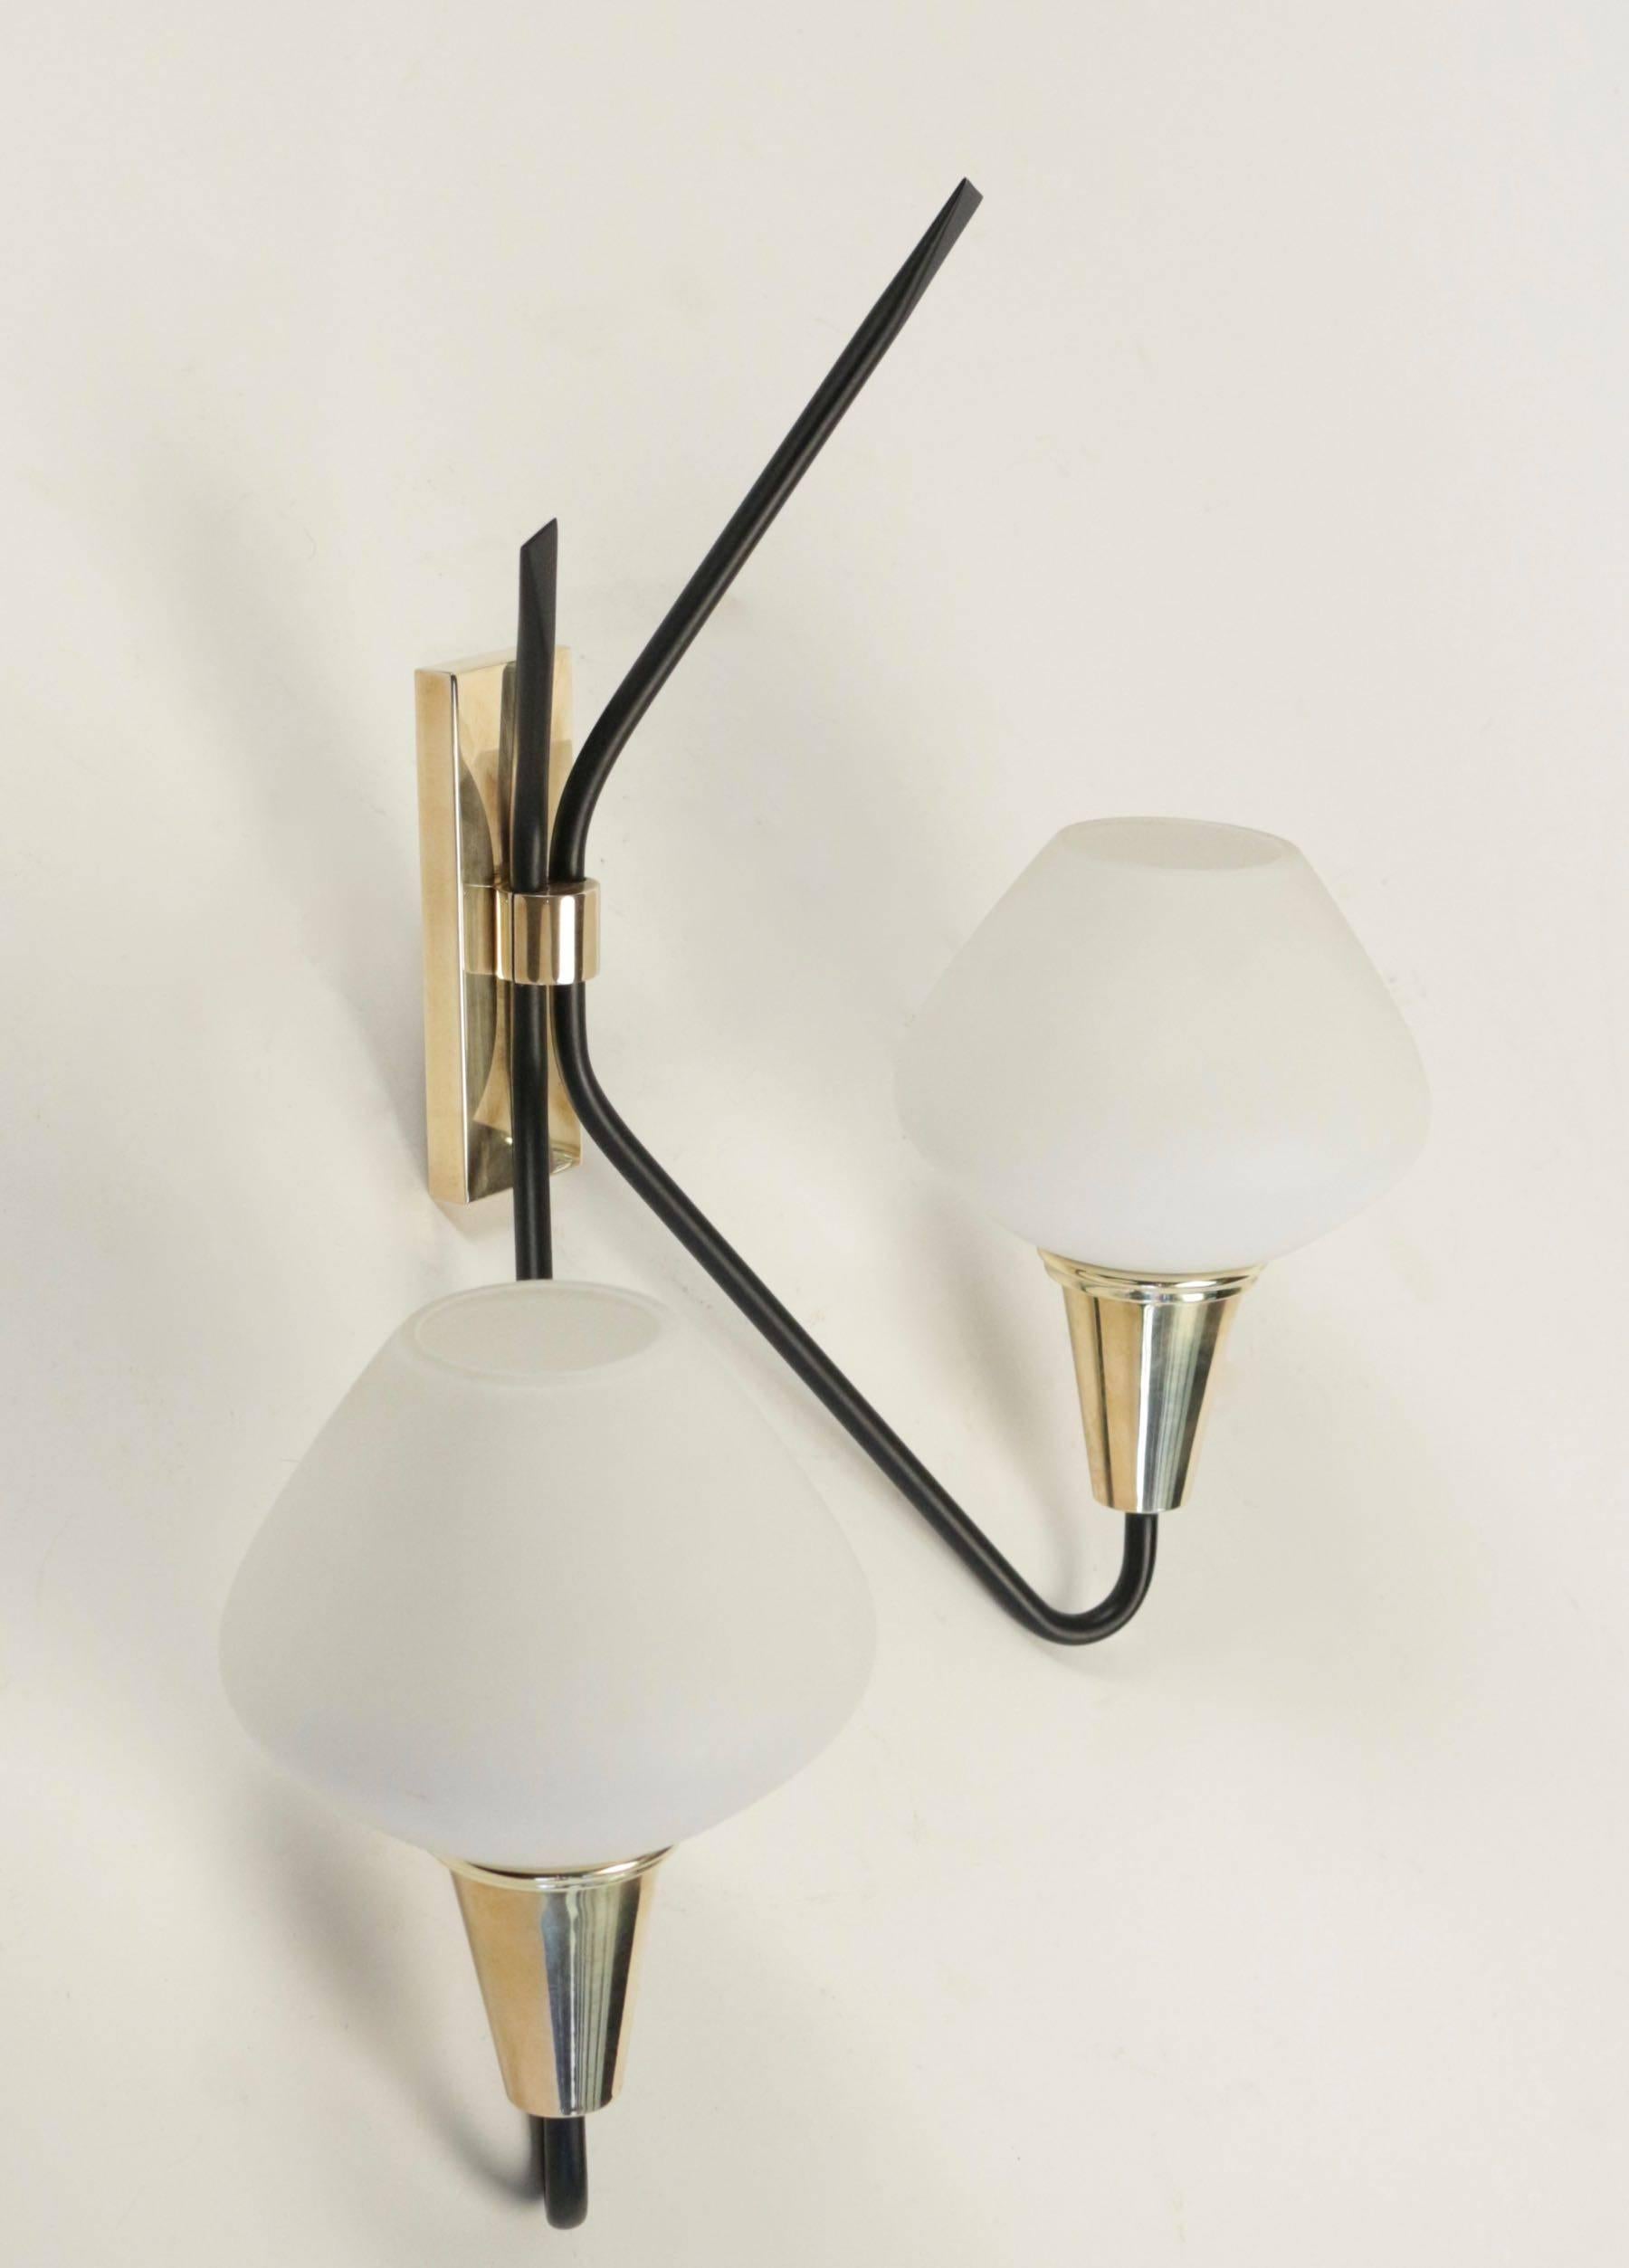 Mid-20th Century Pair of Asymmetrical Sconces by Maison Arlus, 1950